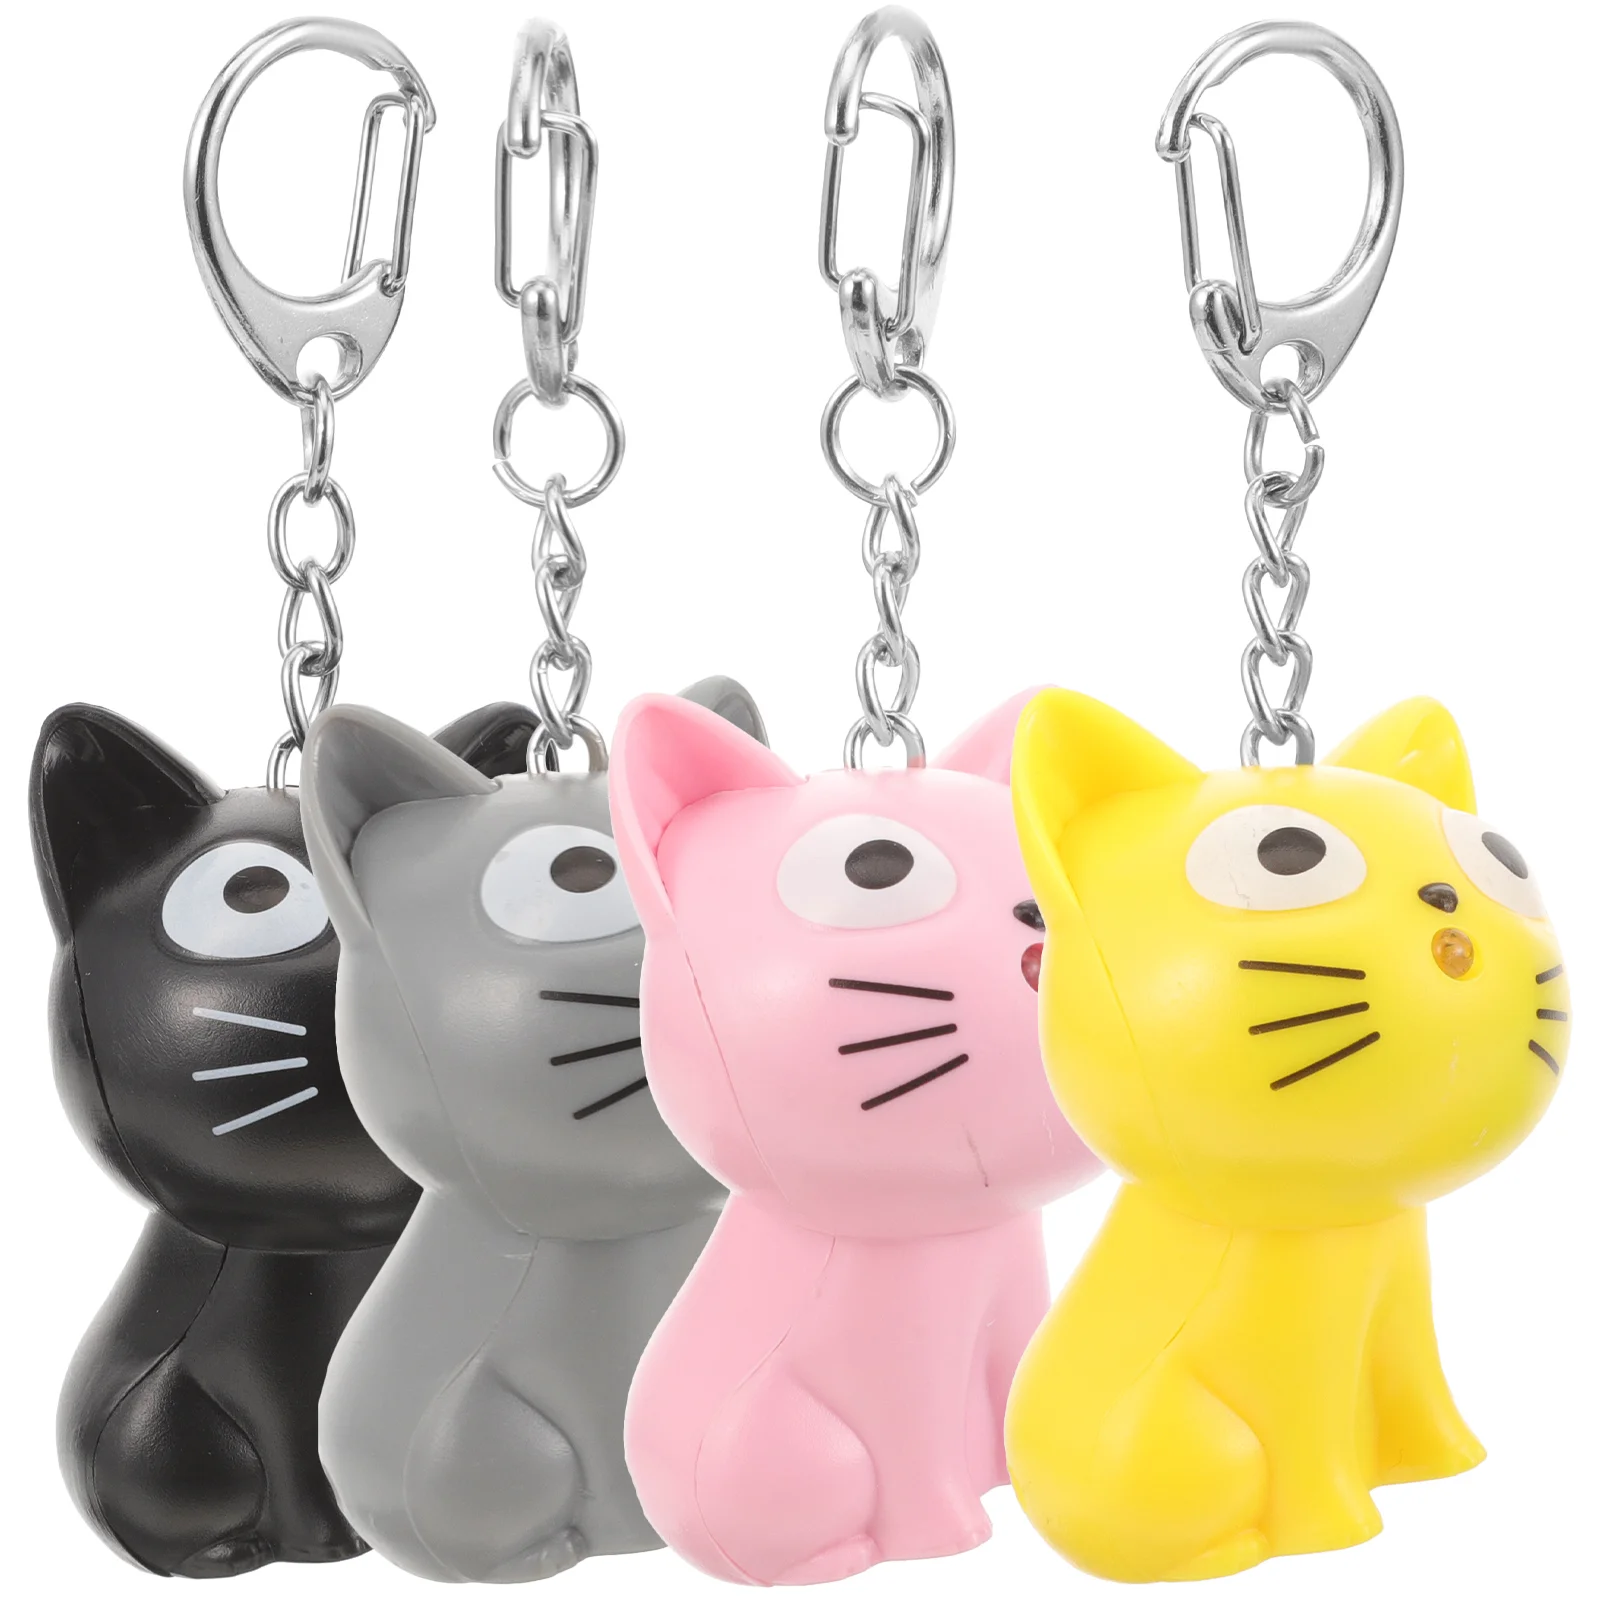 

4 Pcs Cheese Cat Keychain Mini Light up Ring Hanging Pendant Button Keychains for Backpack